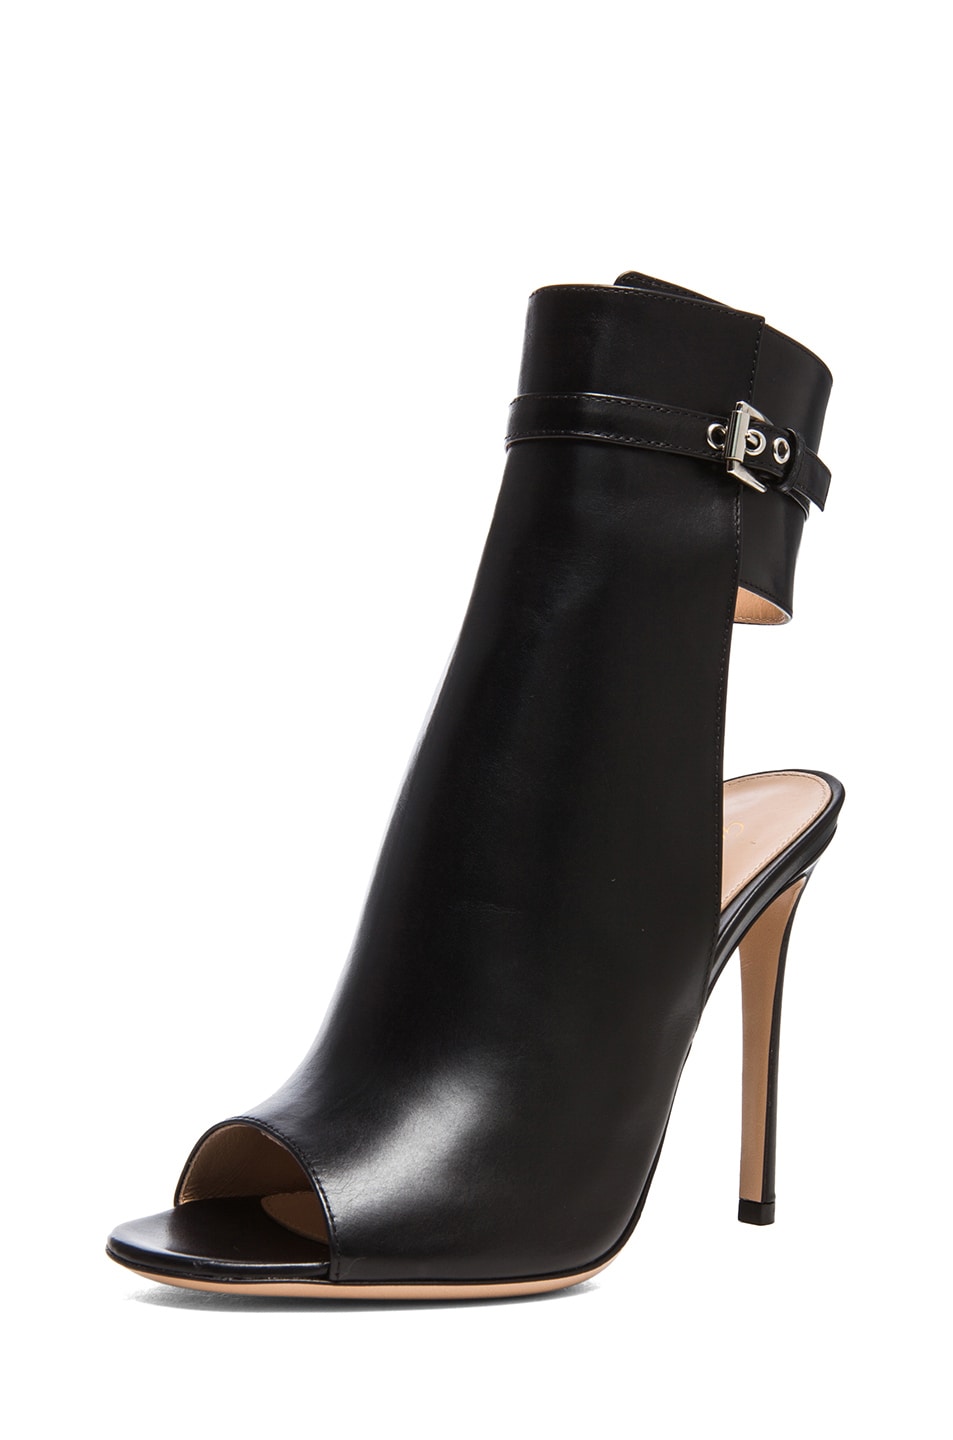 Gianvito Rossi Ankle Strap Leather Booties in Black | FWRD